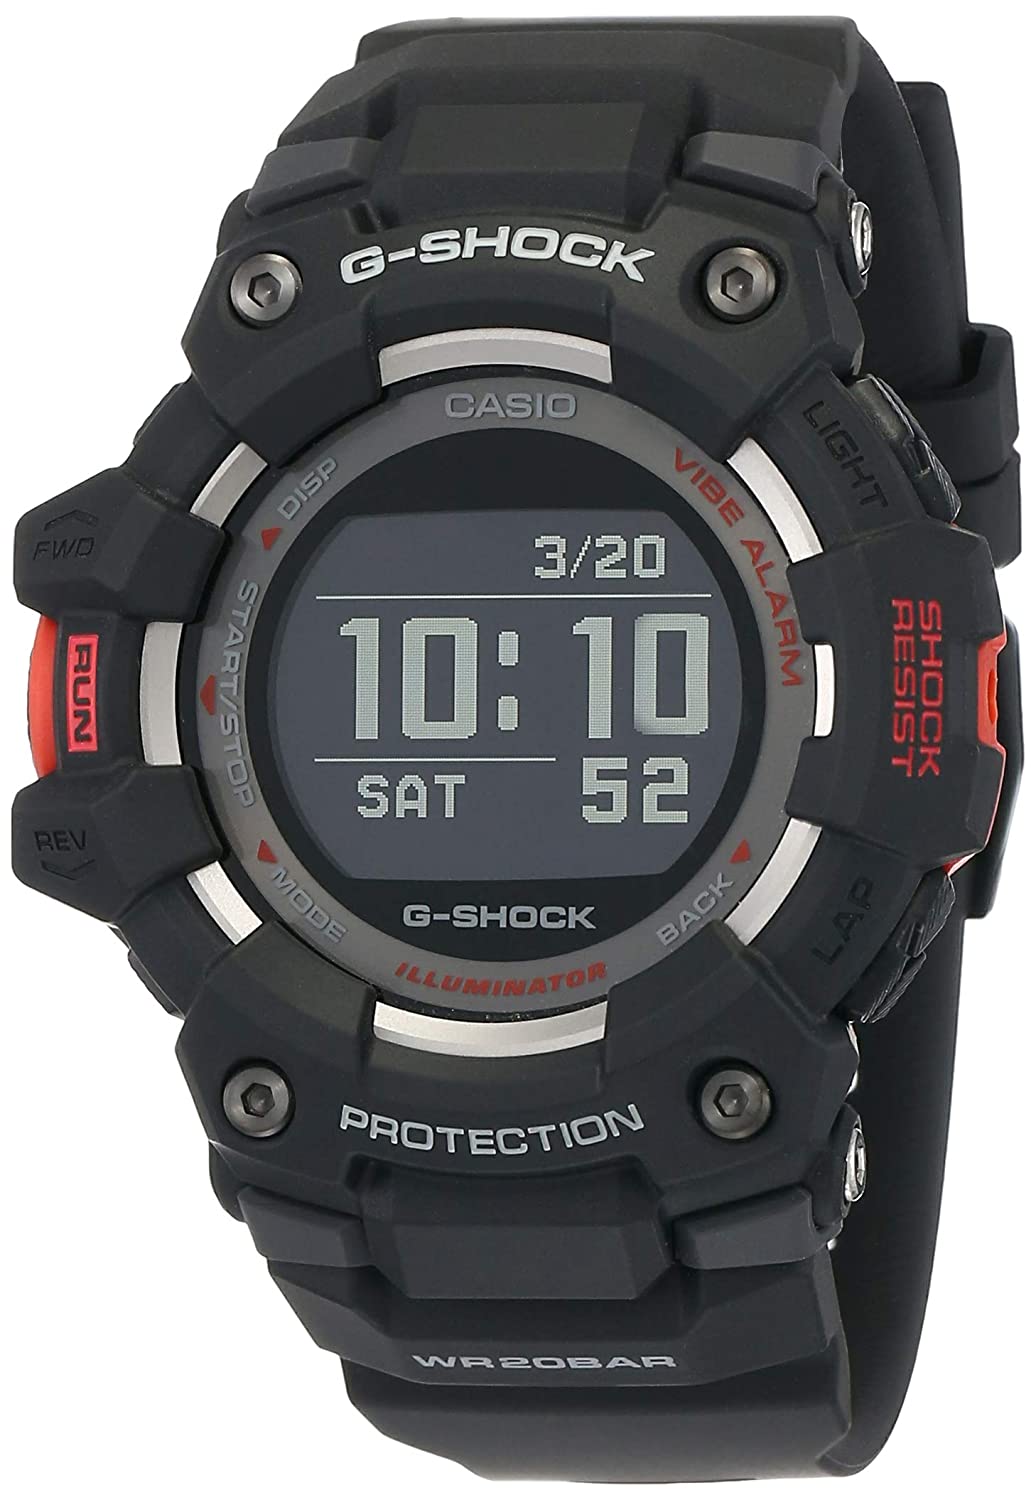 Casio G Shock Offer | 10% Instant Discount On Bank Of Baroda Credit Card